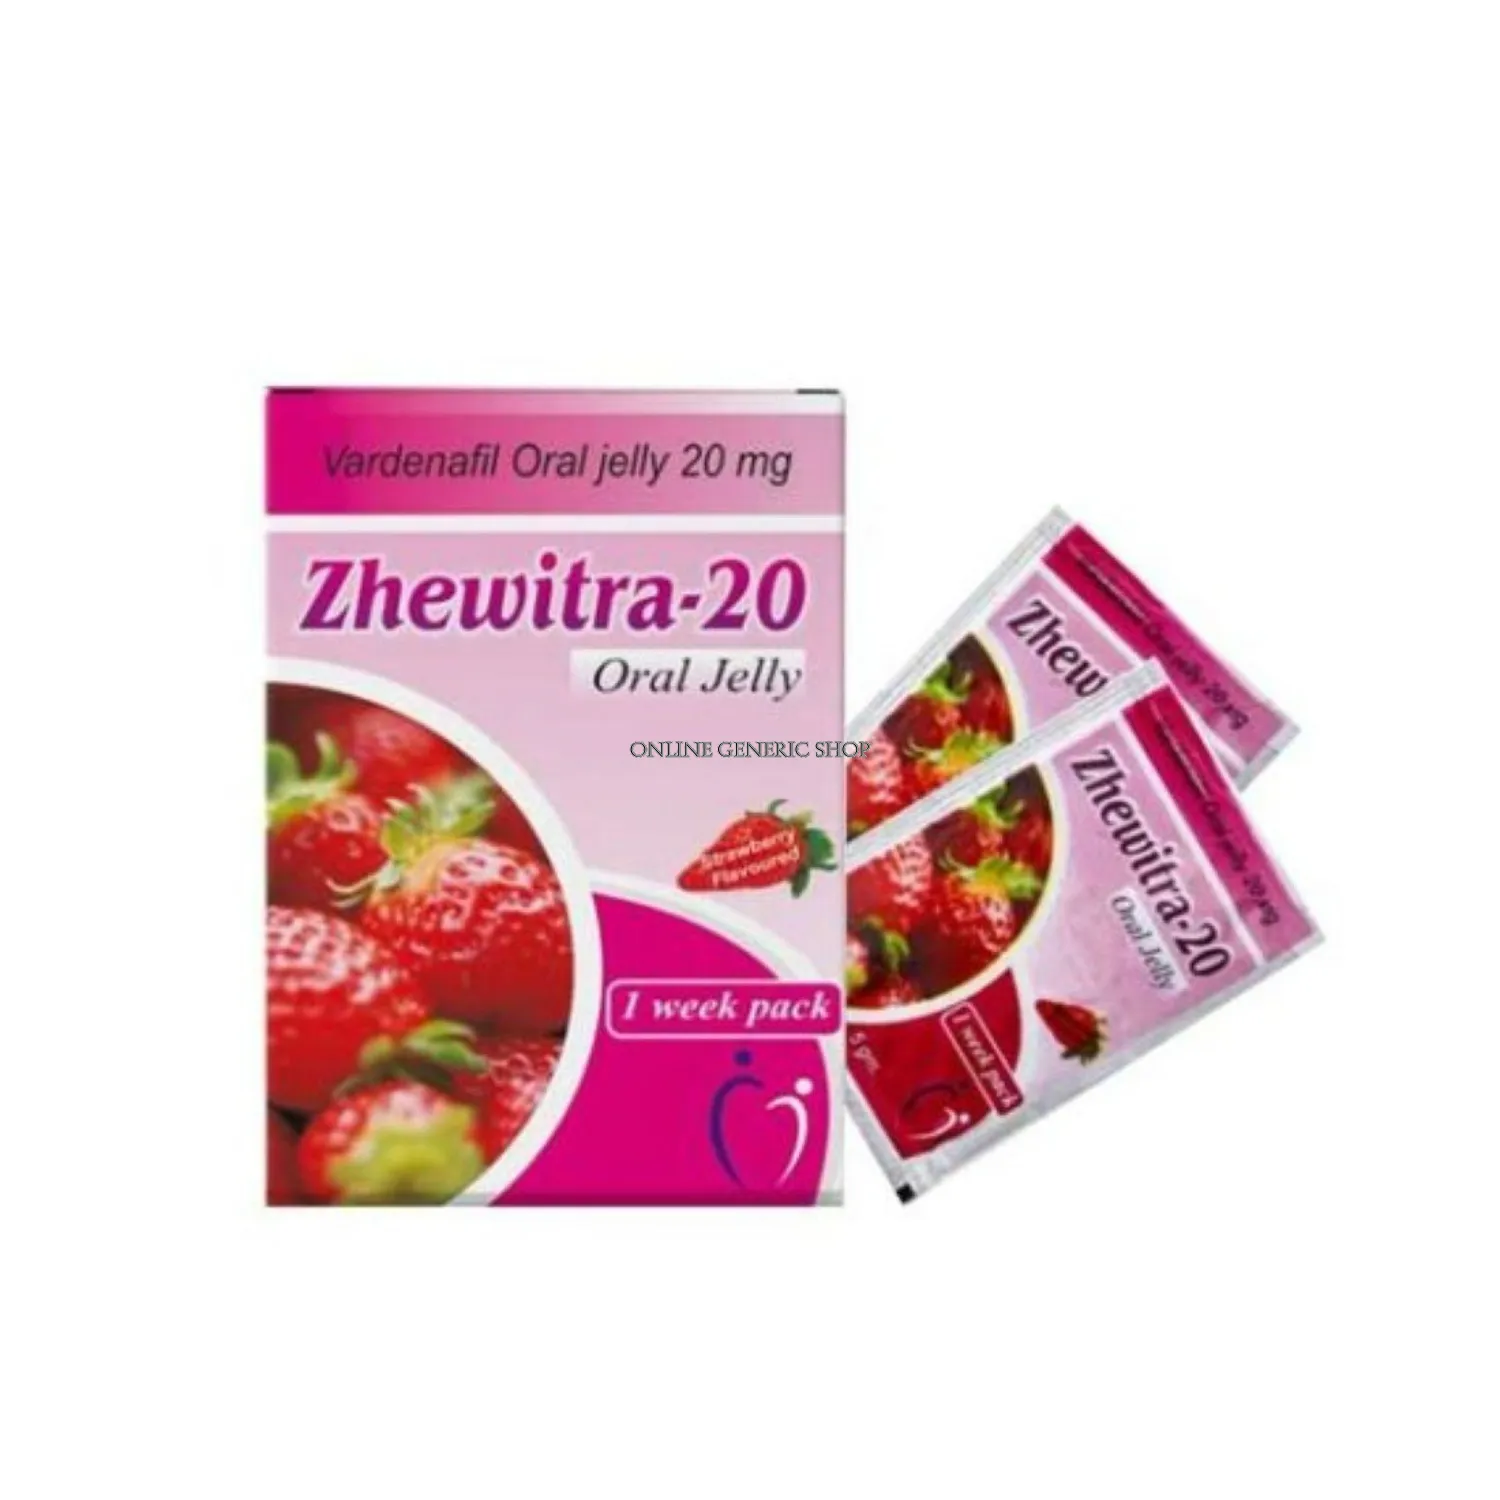 Zhewitra Oral Jelly image